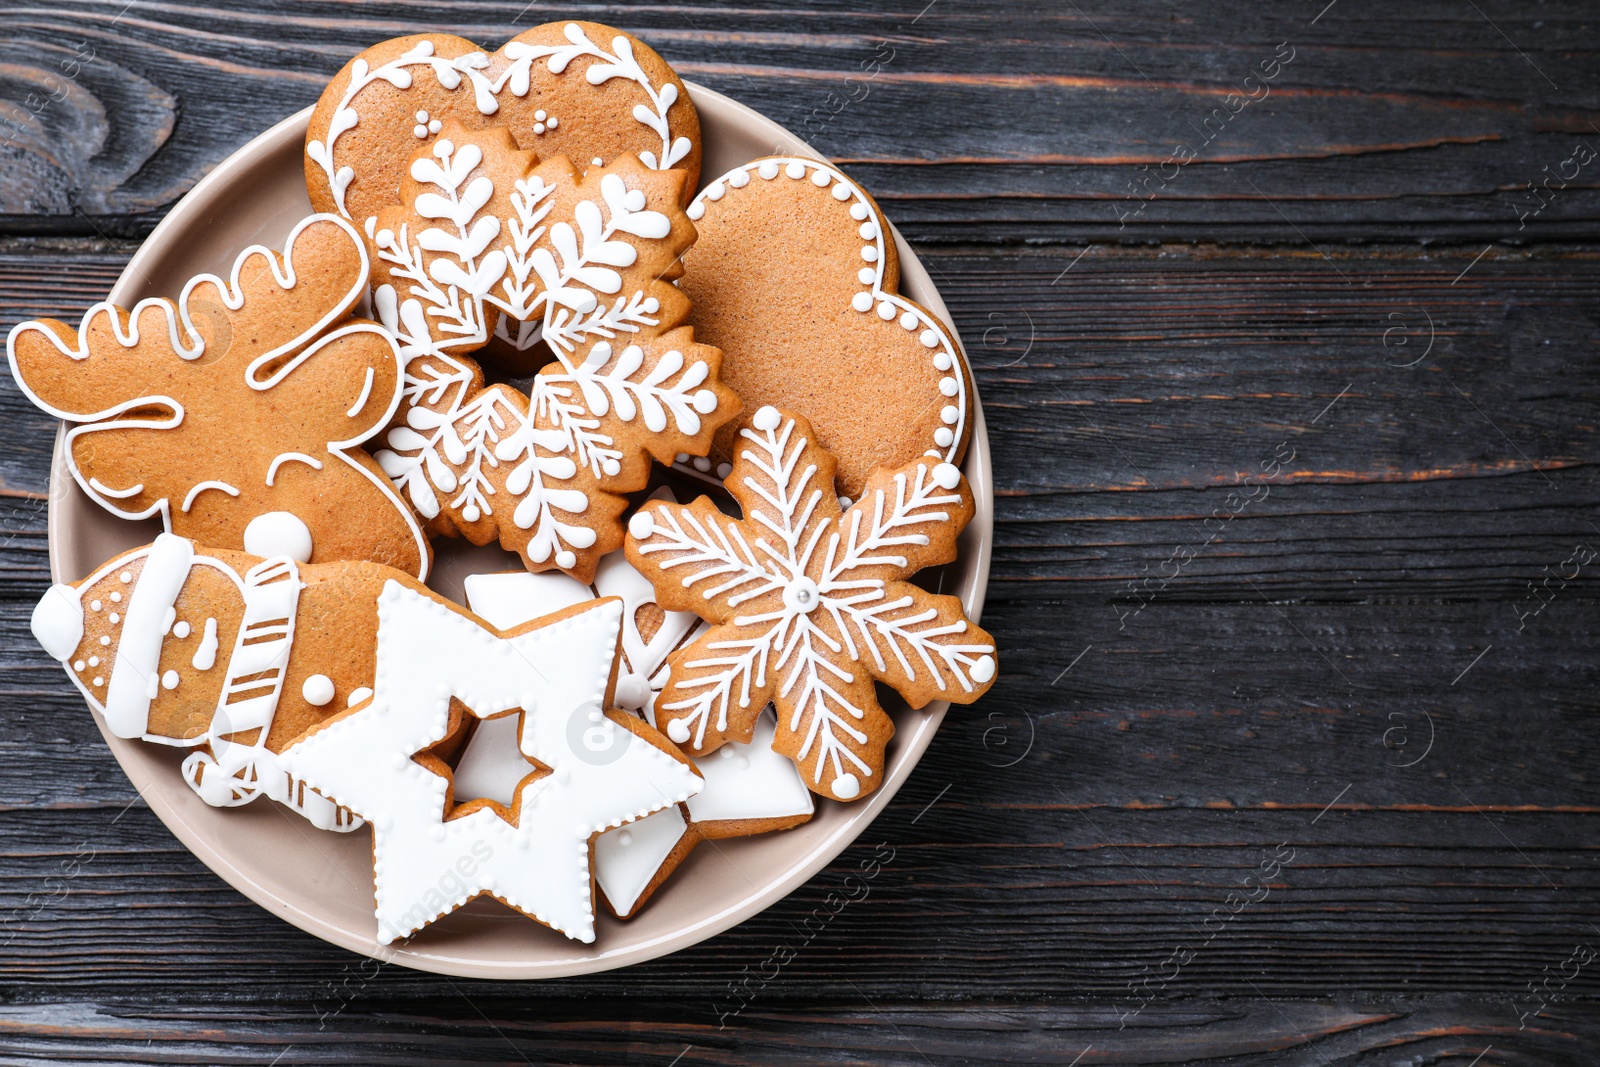 Photo of Delicious Christmas cookies on black wooden table table, top view